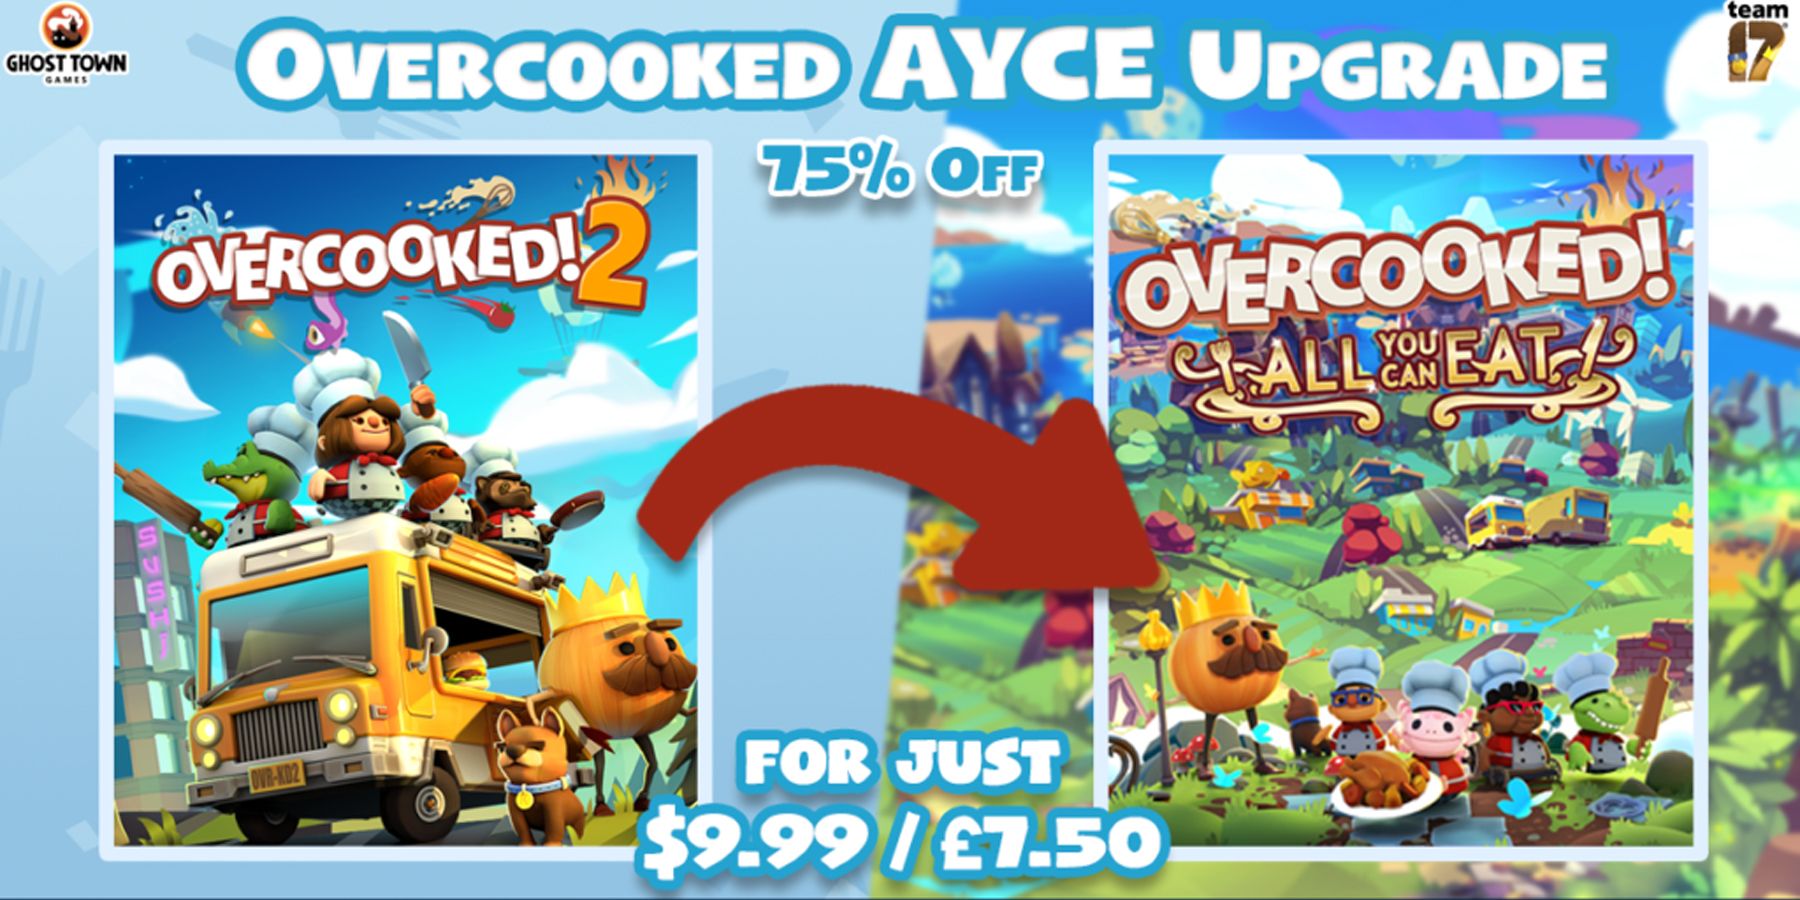 Overcooked Provides Update on Upgrade Scheme